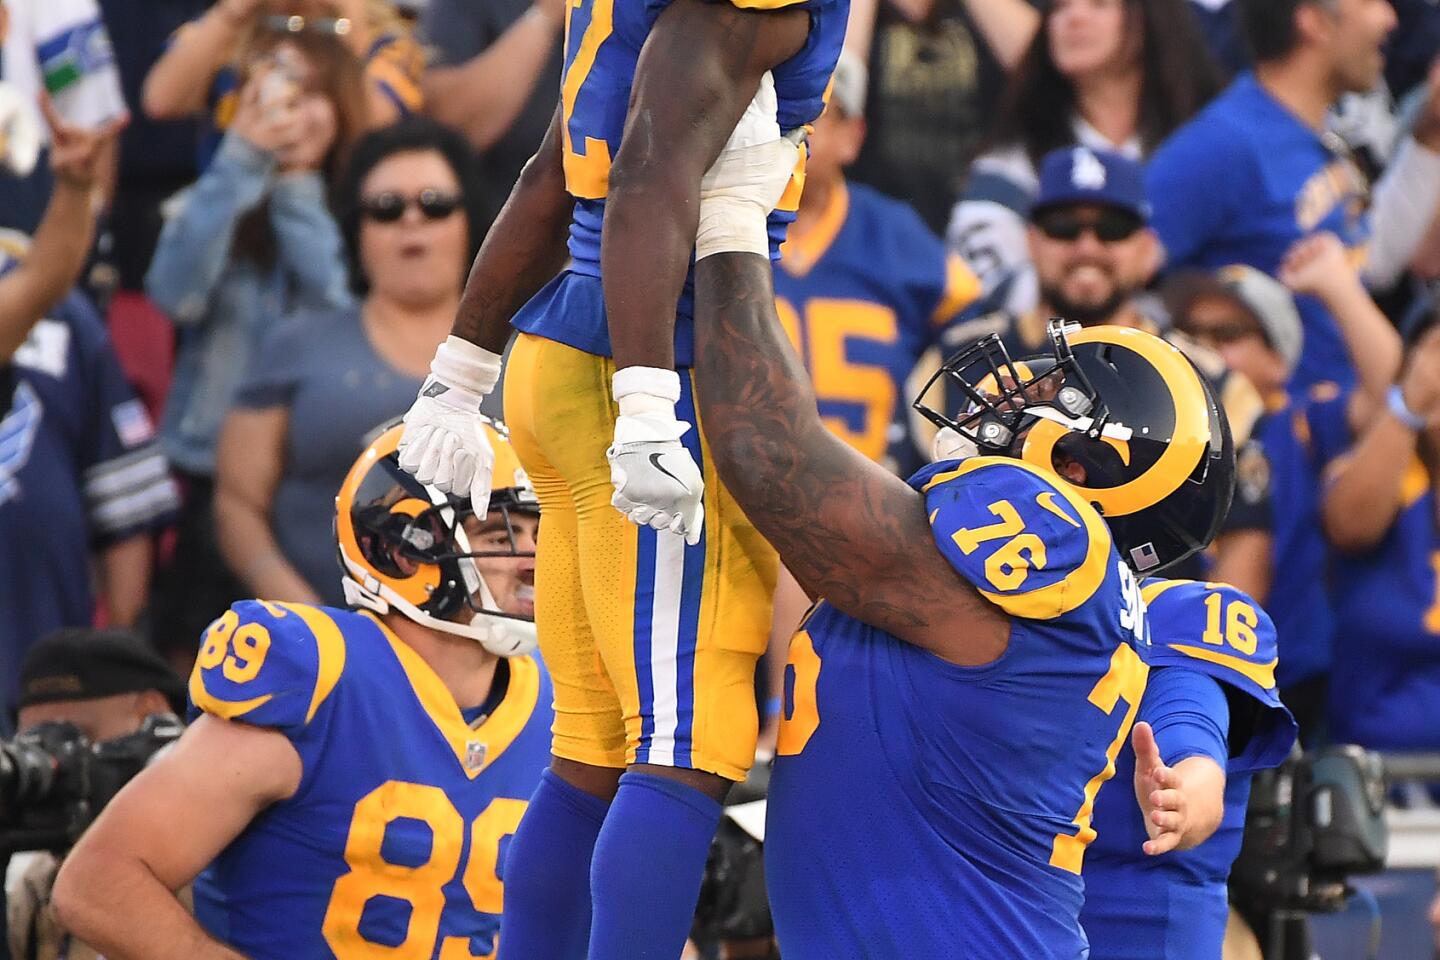 Rams receiver Brandin Cooks is lifted into the air by Rodger Saffold after scoring a touchdown against the Seahawks in the fourth quarter at the Coliseum on Sunday.